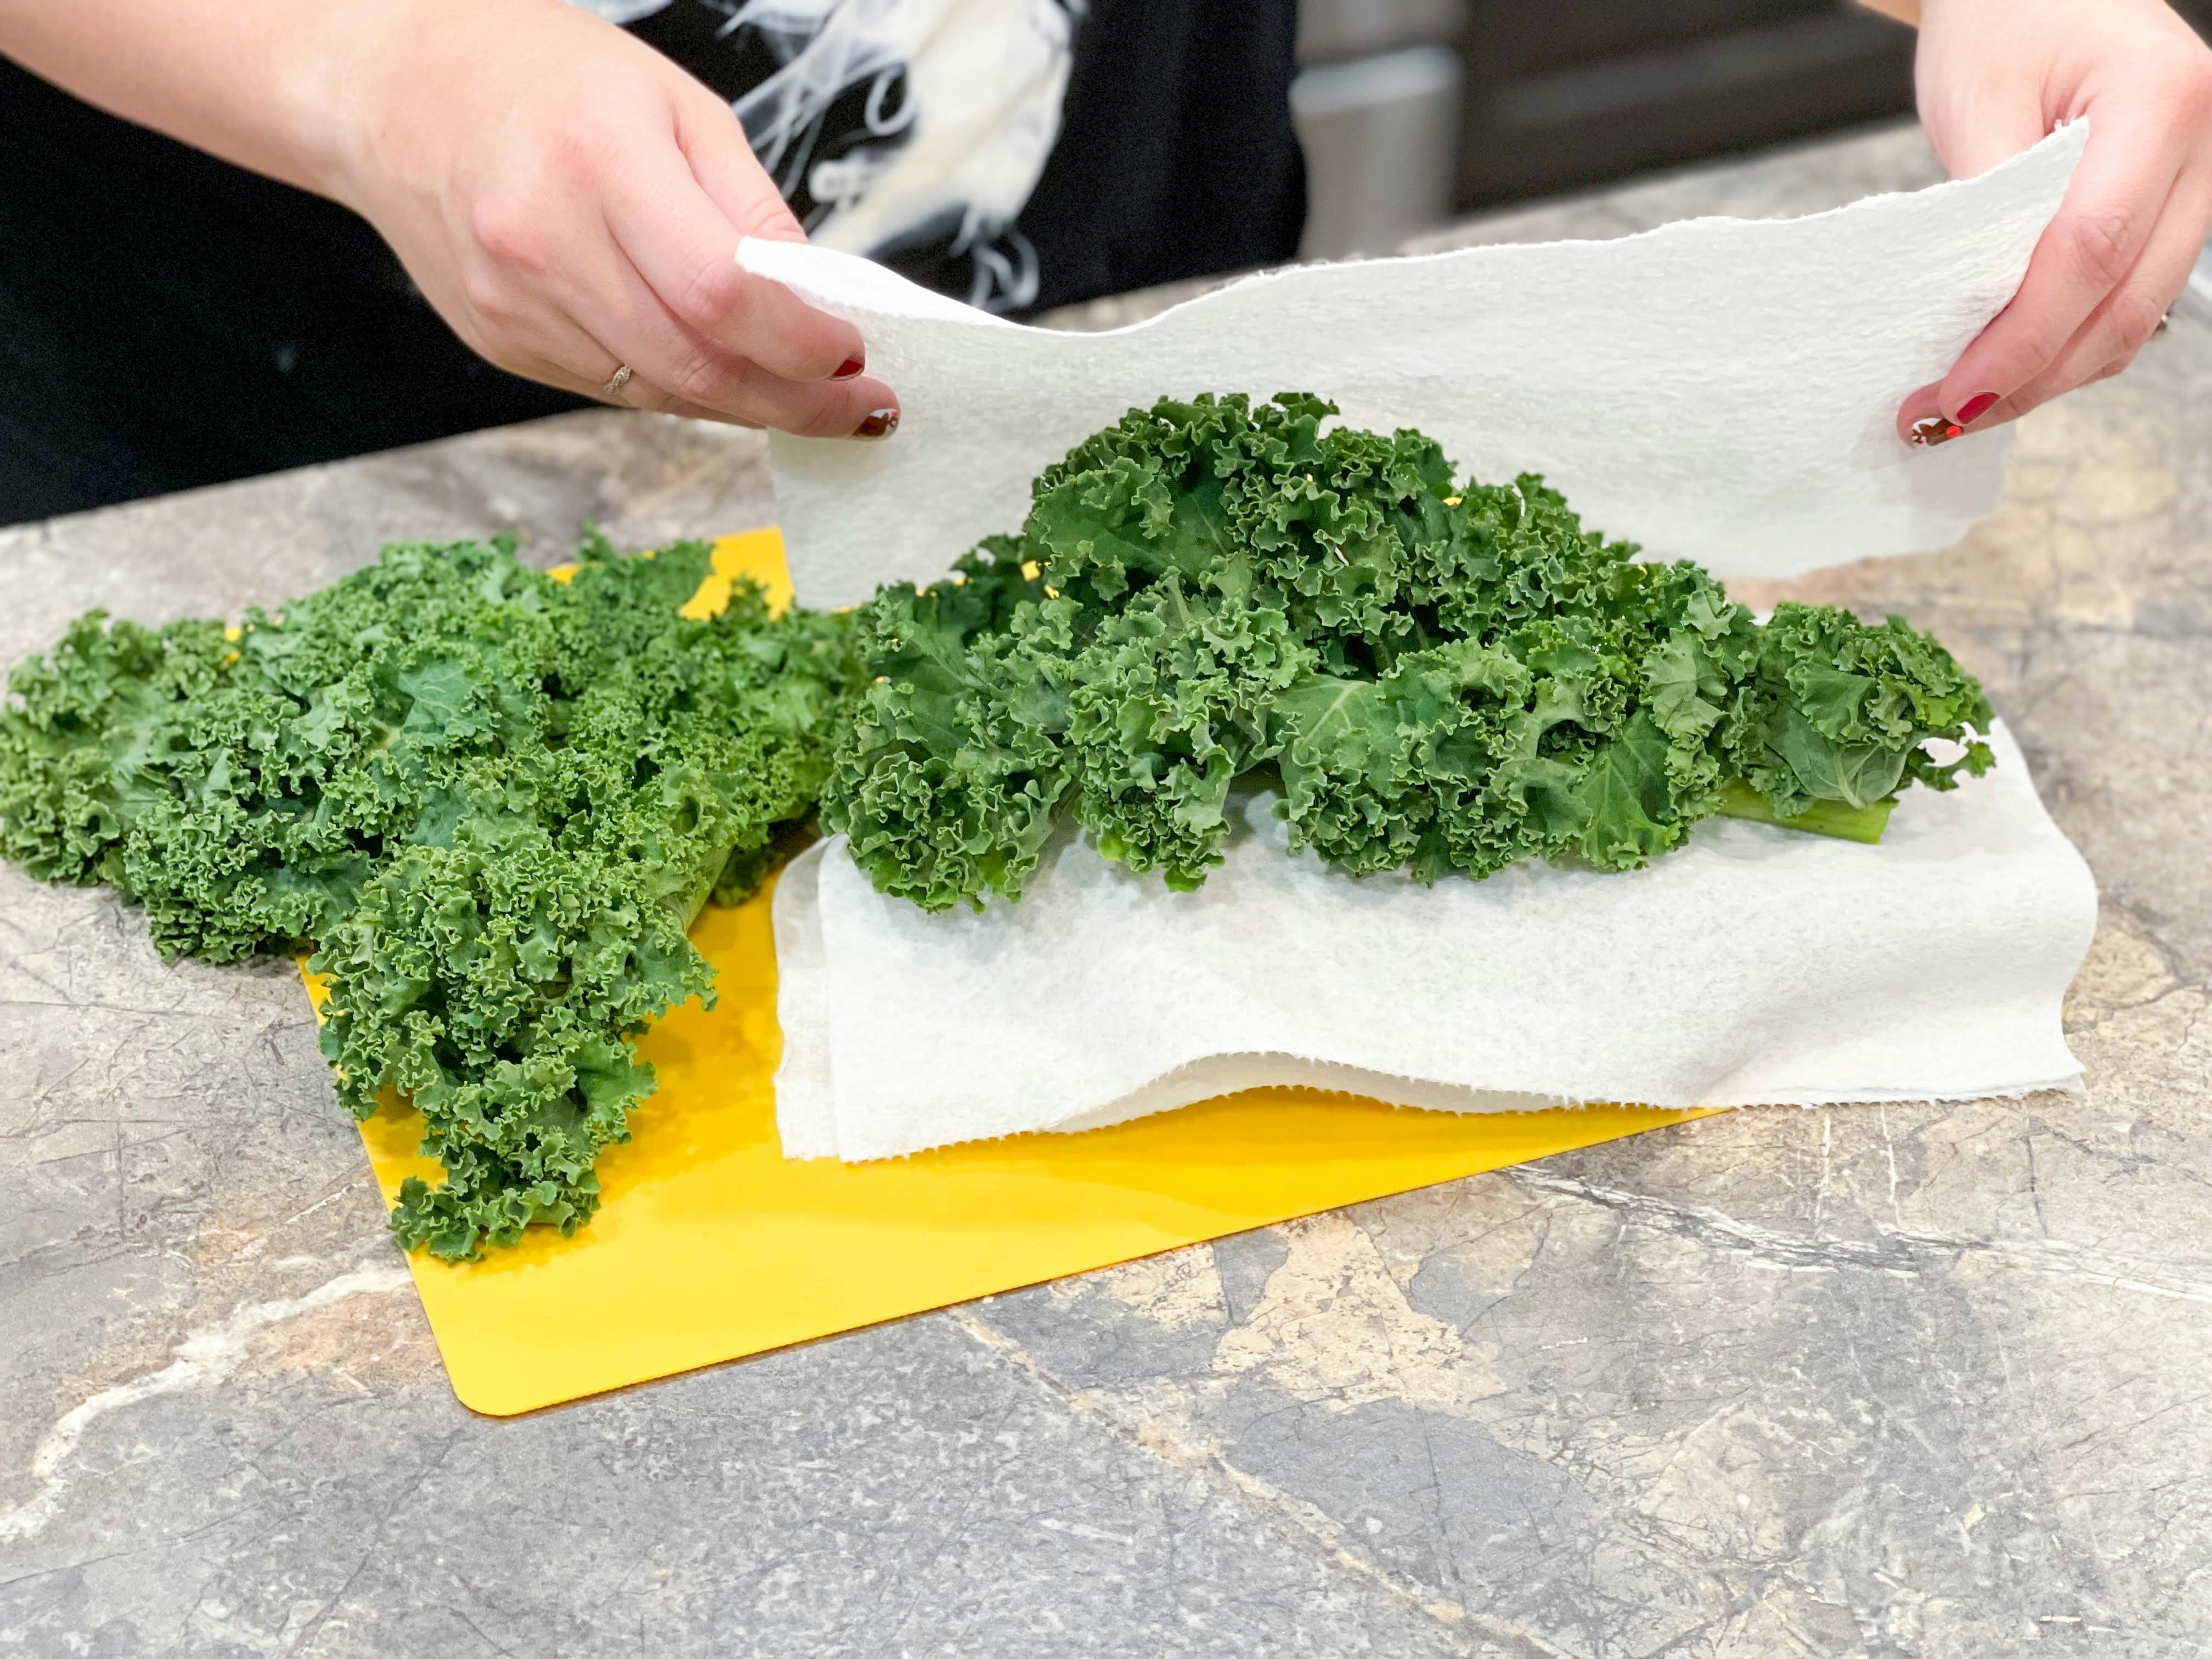 kale being separated with paper towel